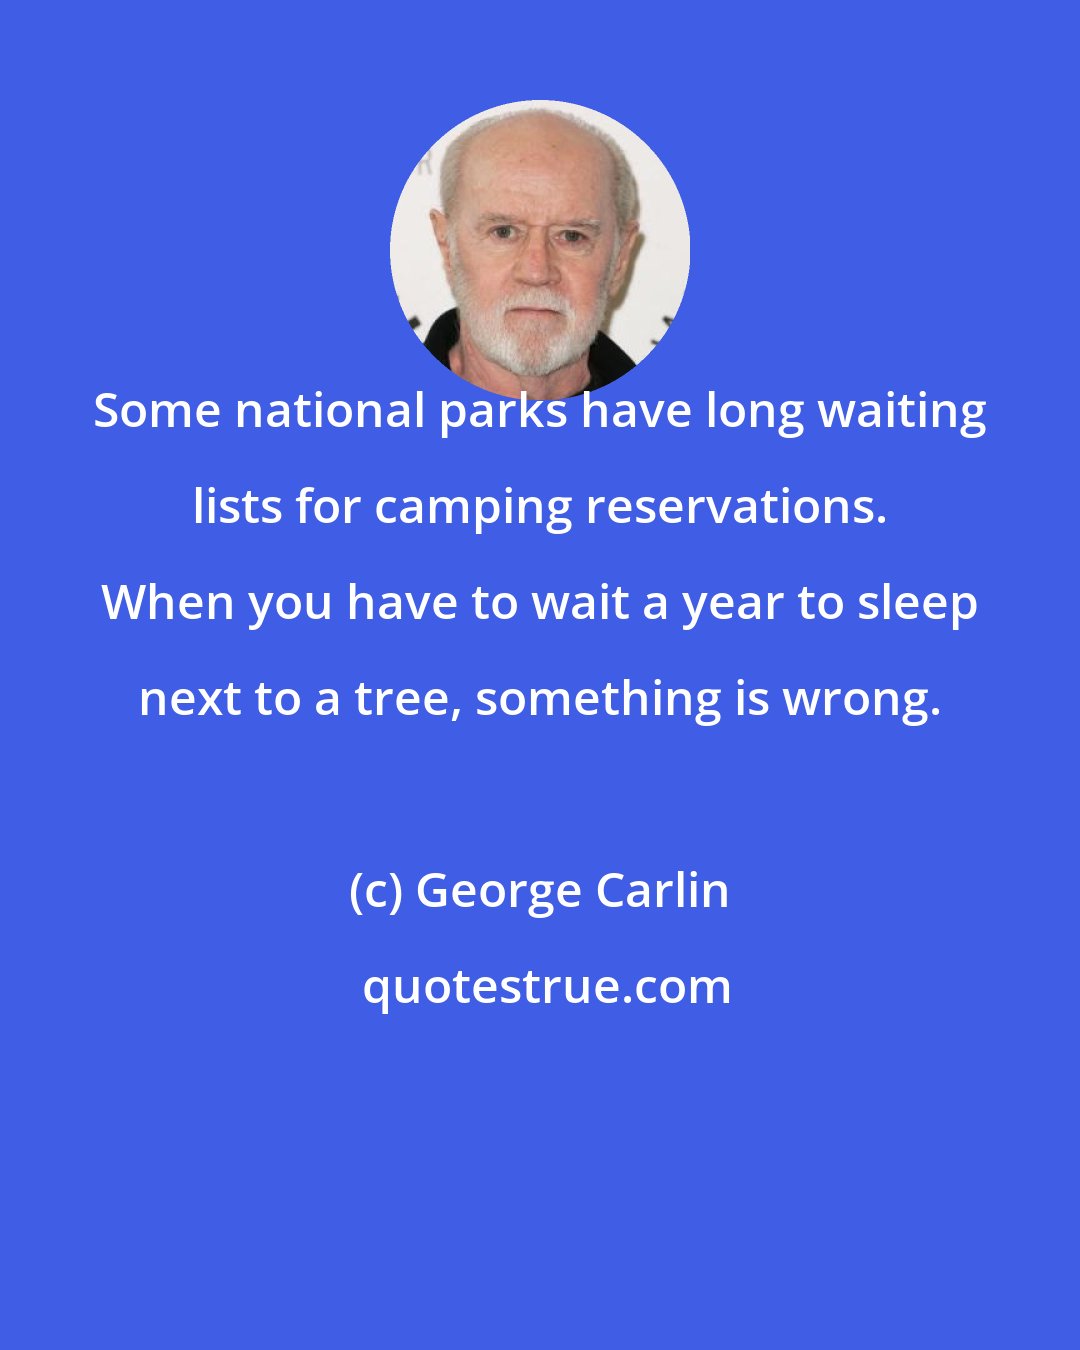 George Carlin: Some national parks have long waiting lists for camping reservations. When you have to wait a year to sleep next to a tree, something is wrong.